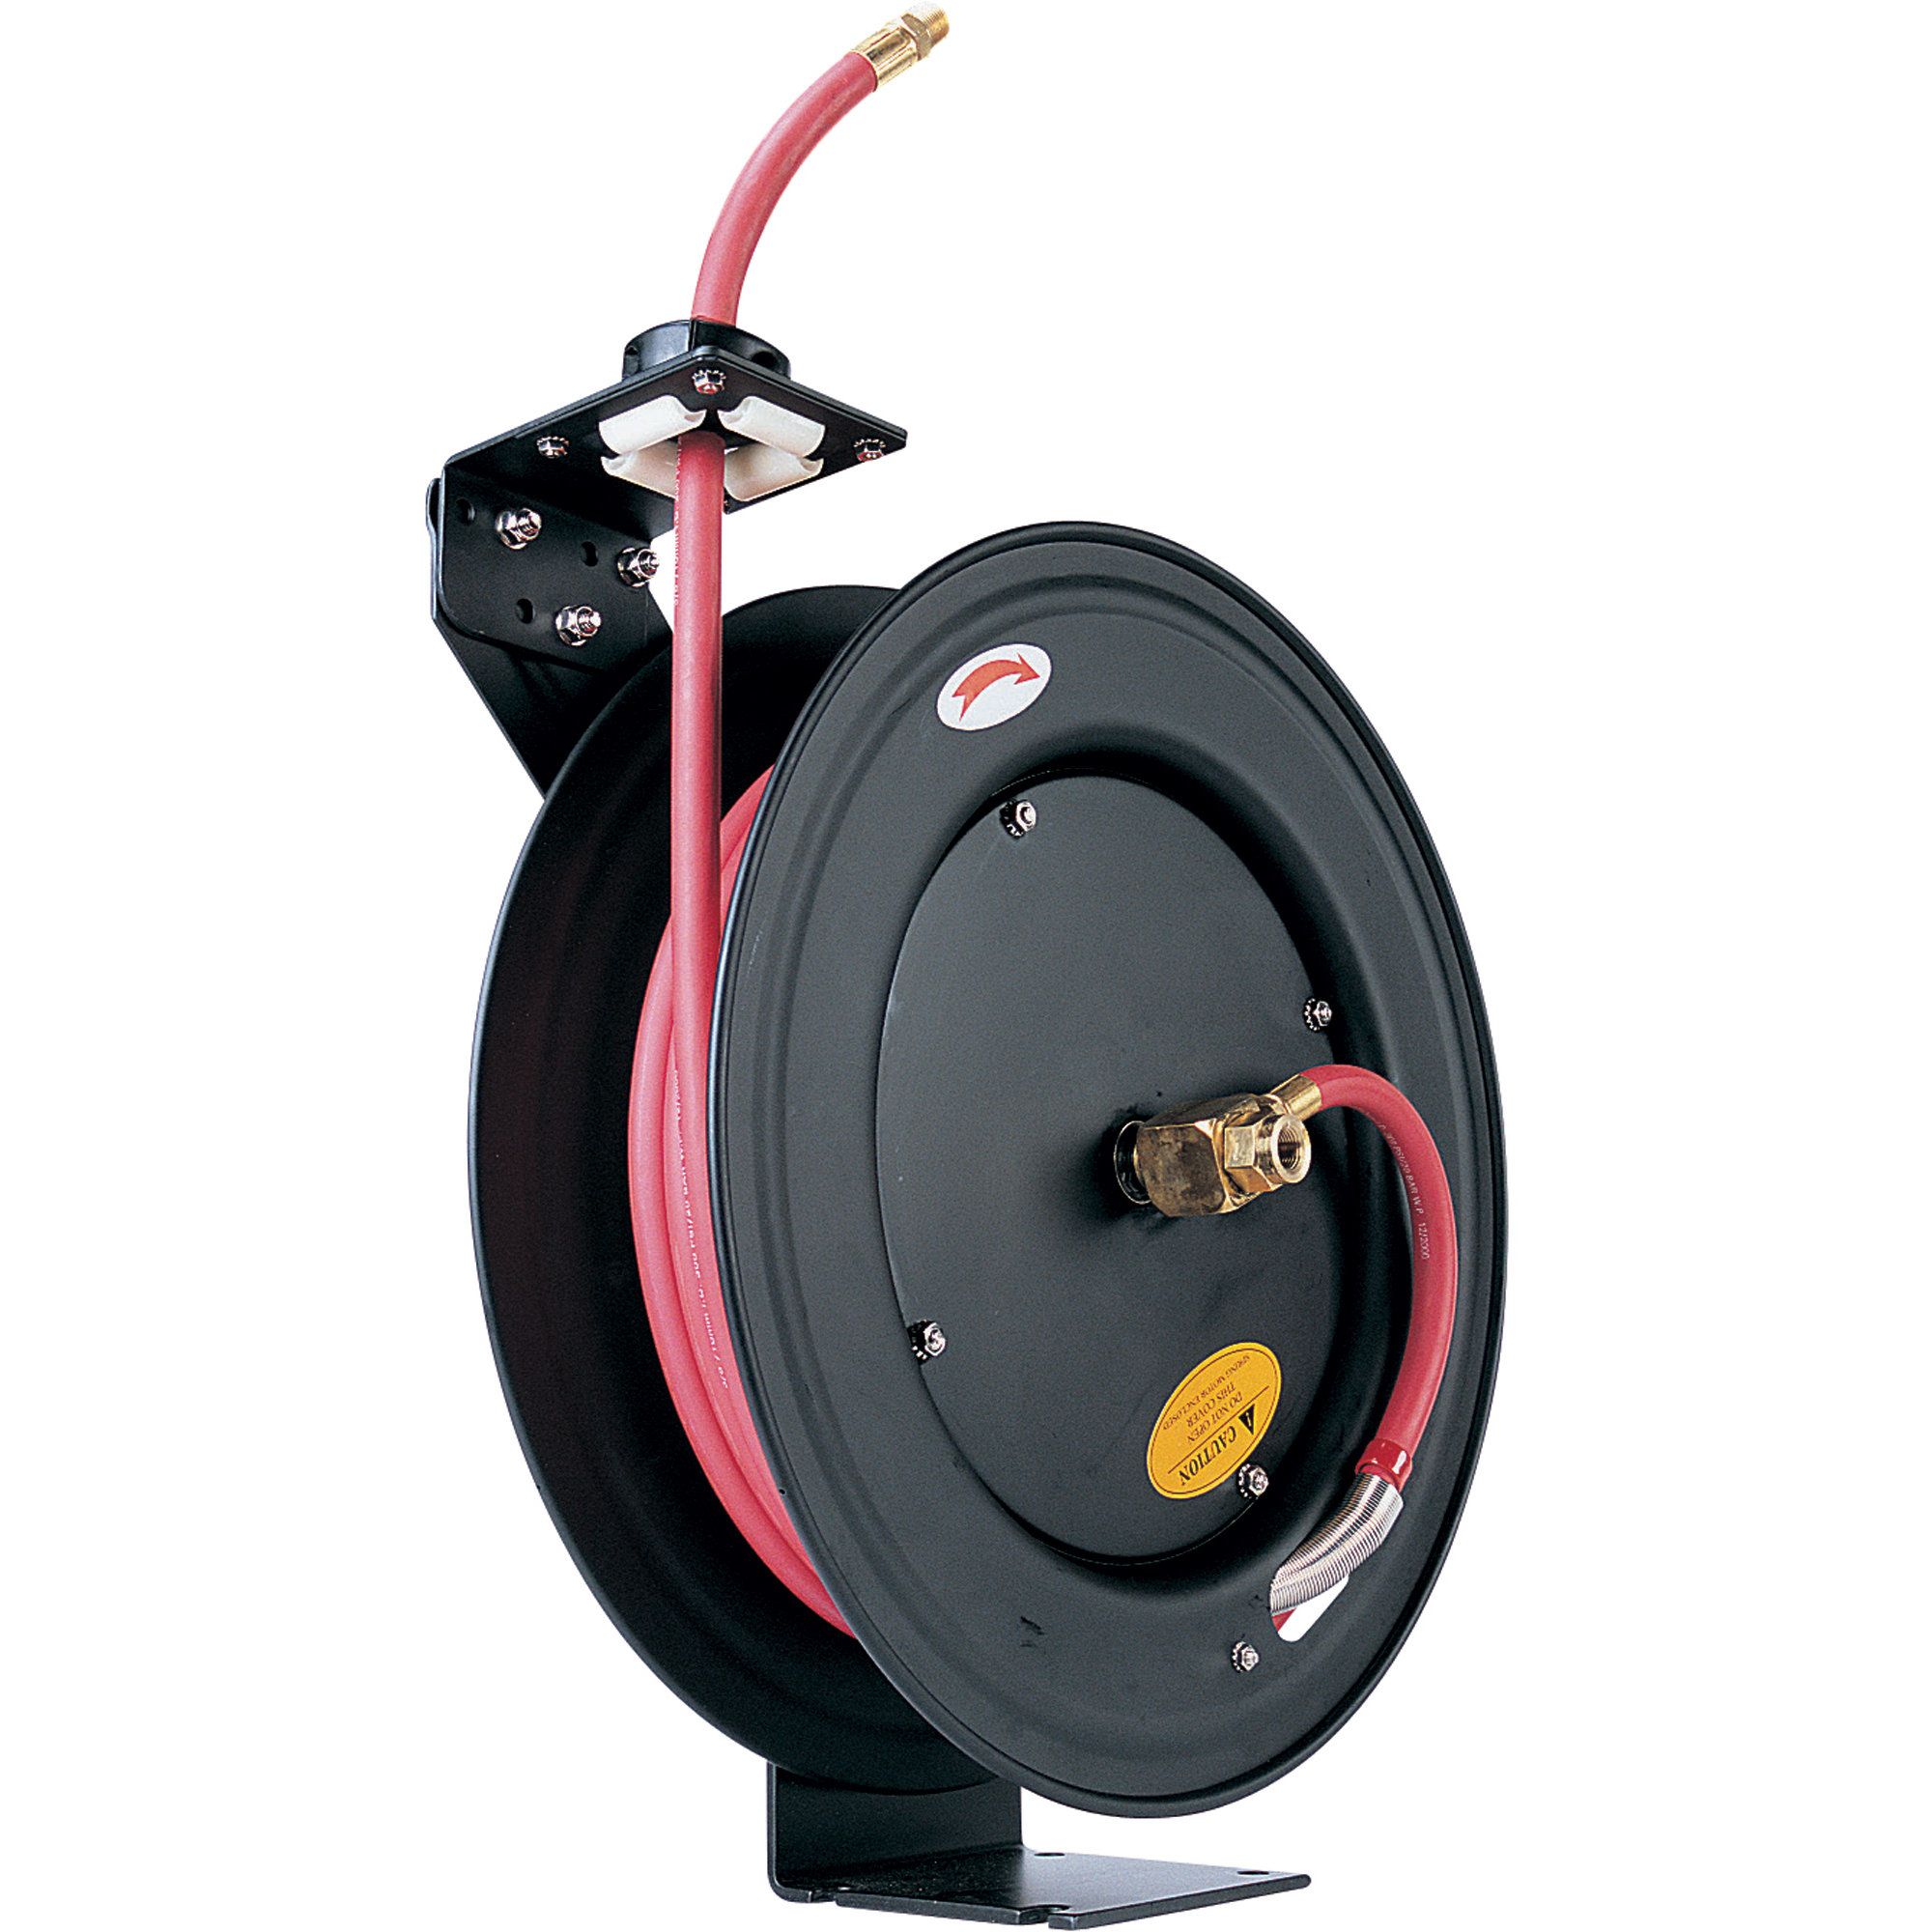 Please see replacement item# 49588. ReelWorks Air Hose Reel with